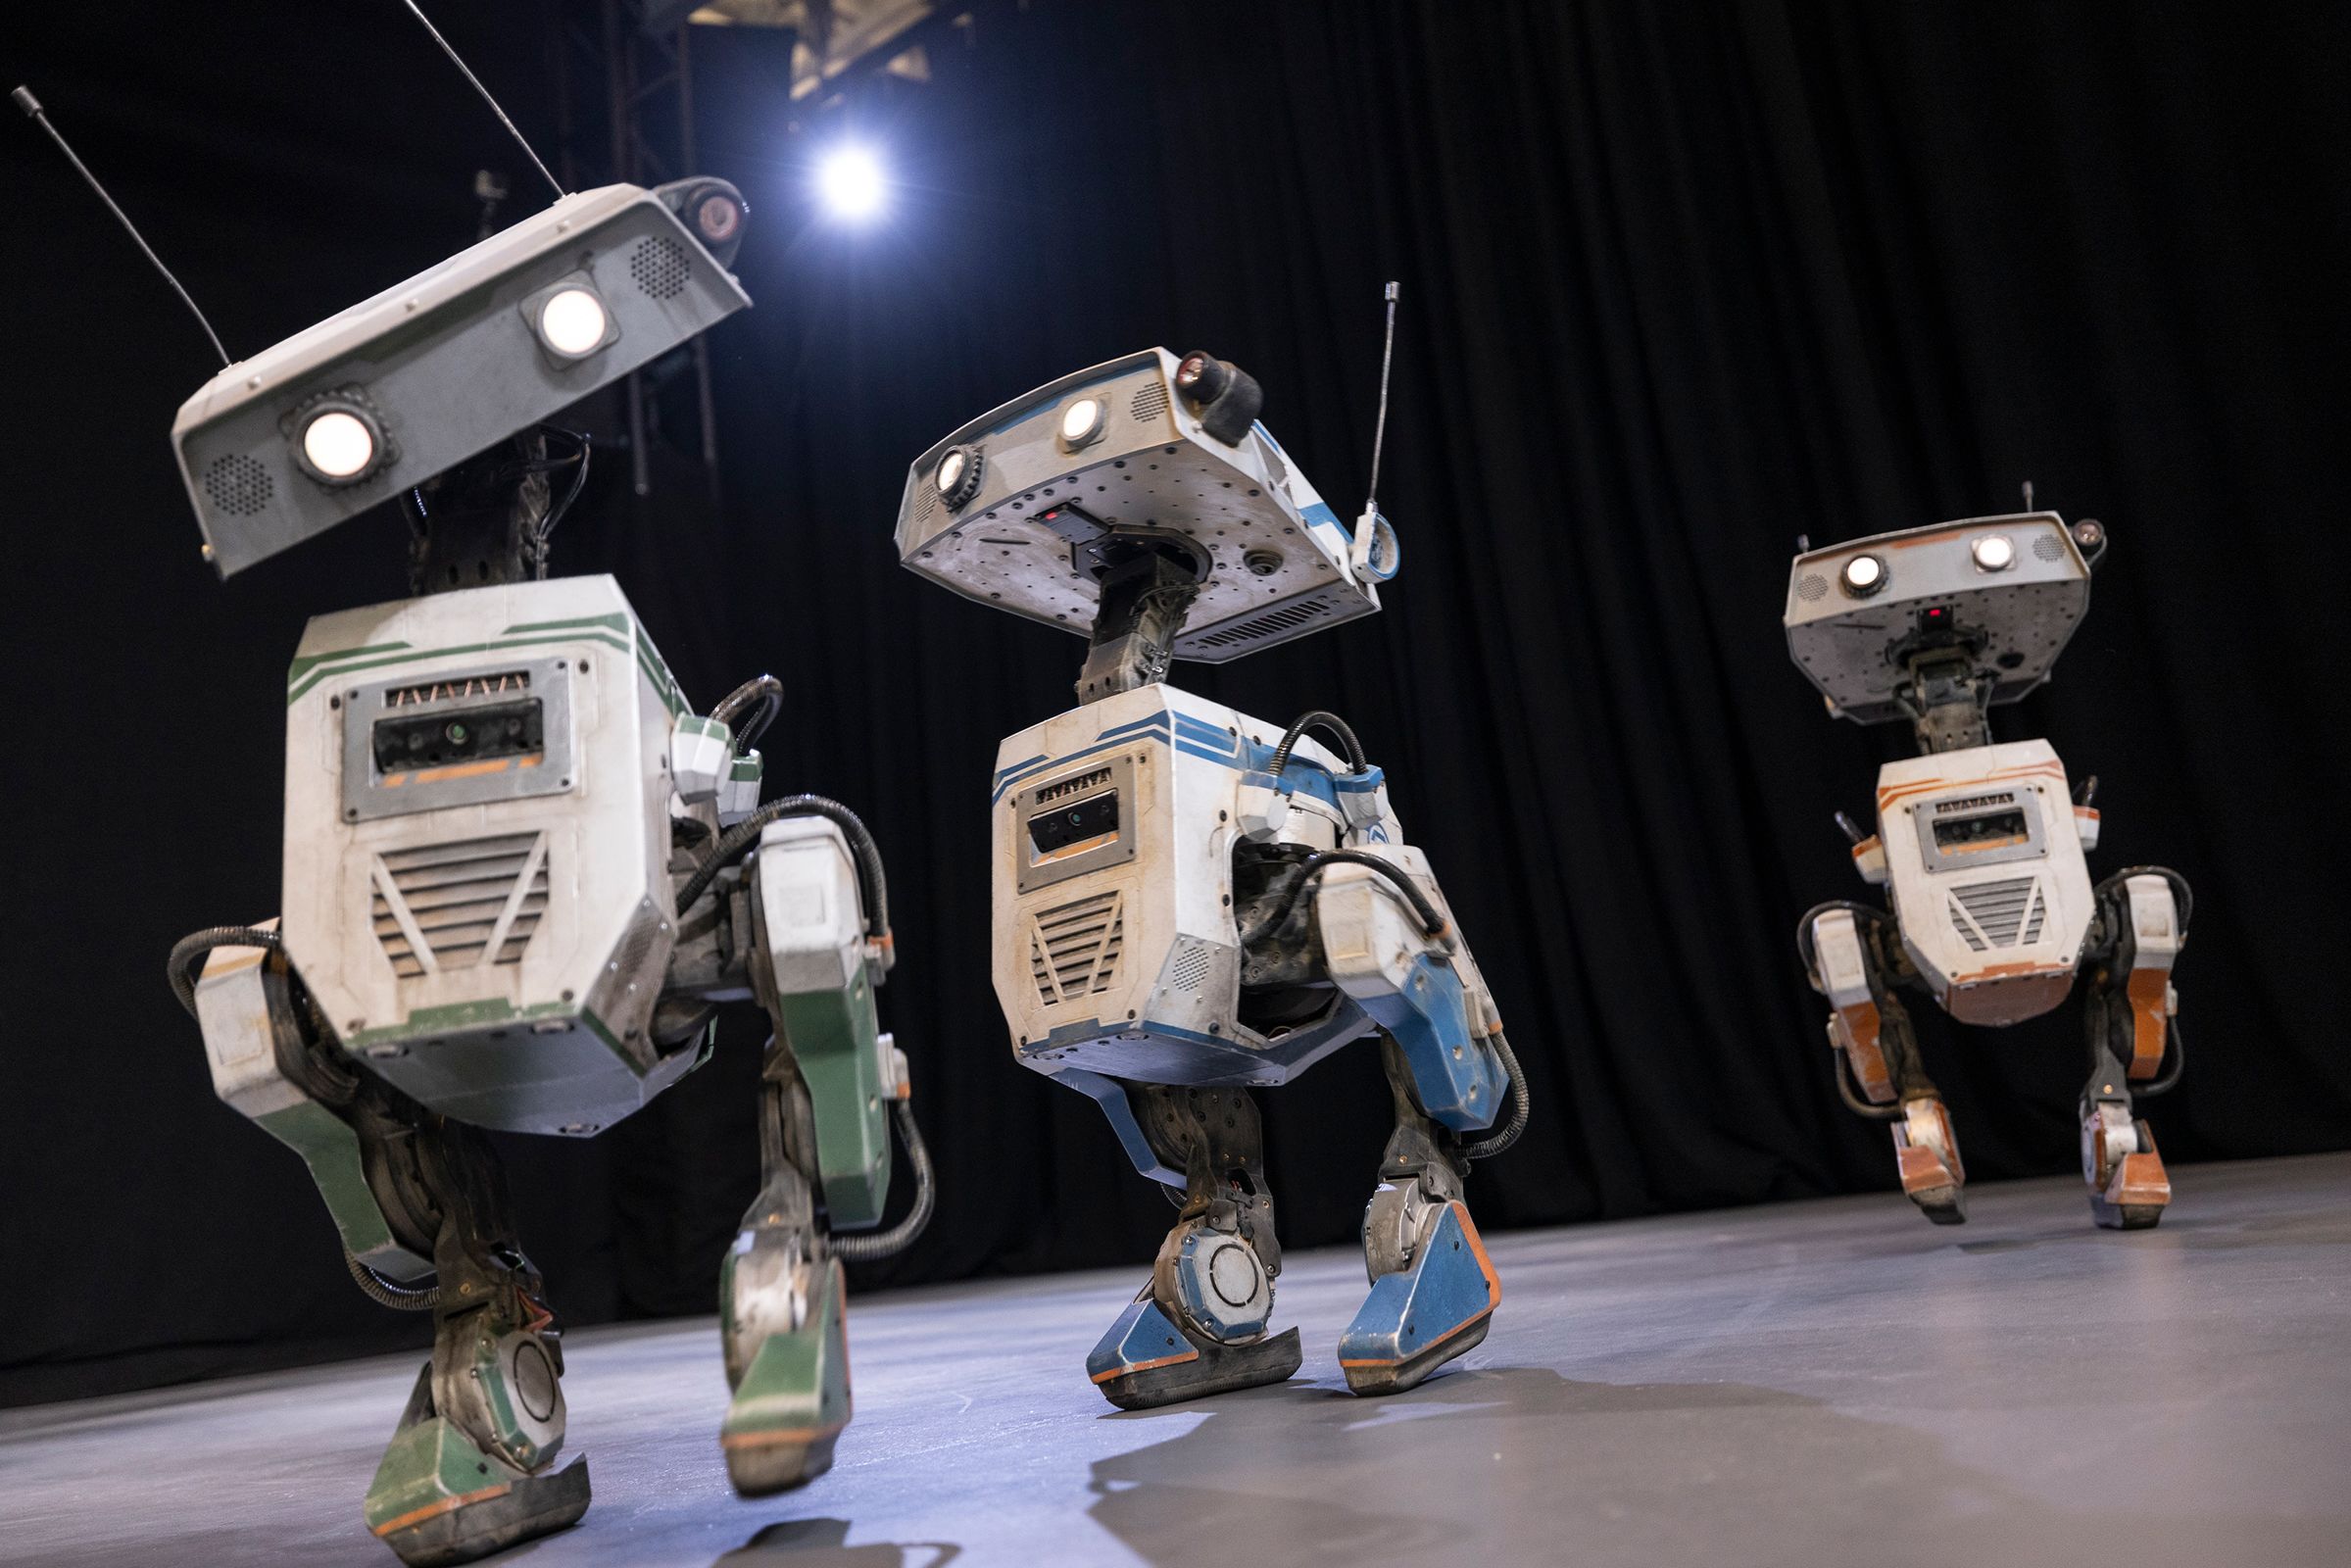 Research and development teams demonstrated “Star Wars” BD-X droids at an event on Tuesday.